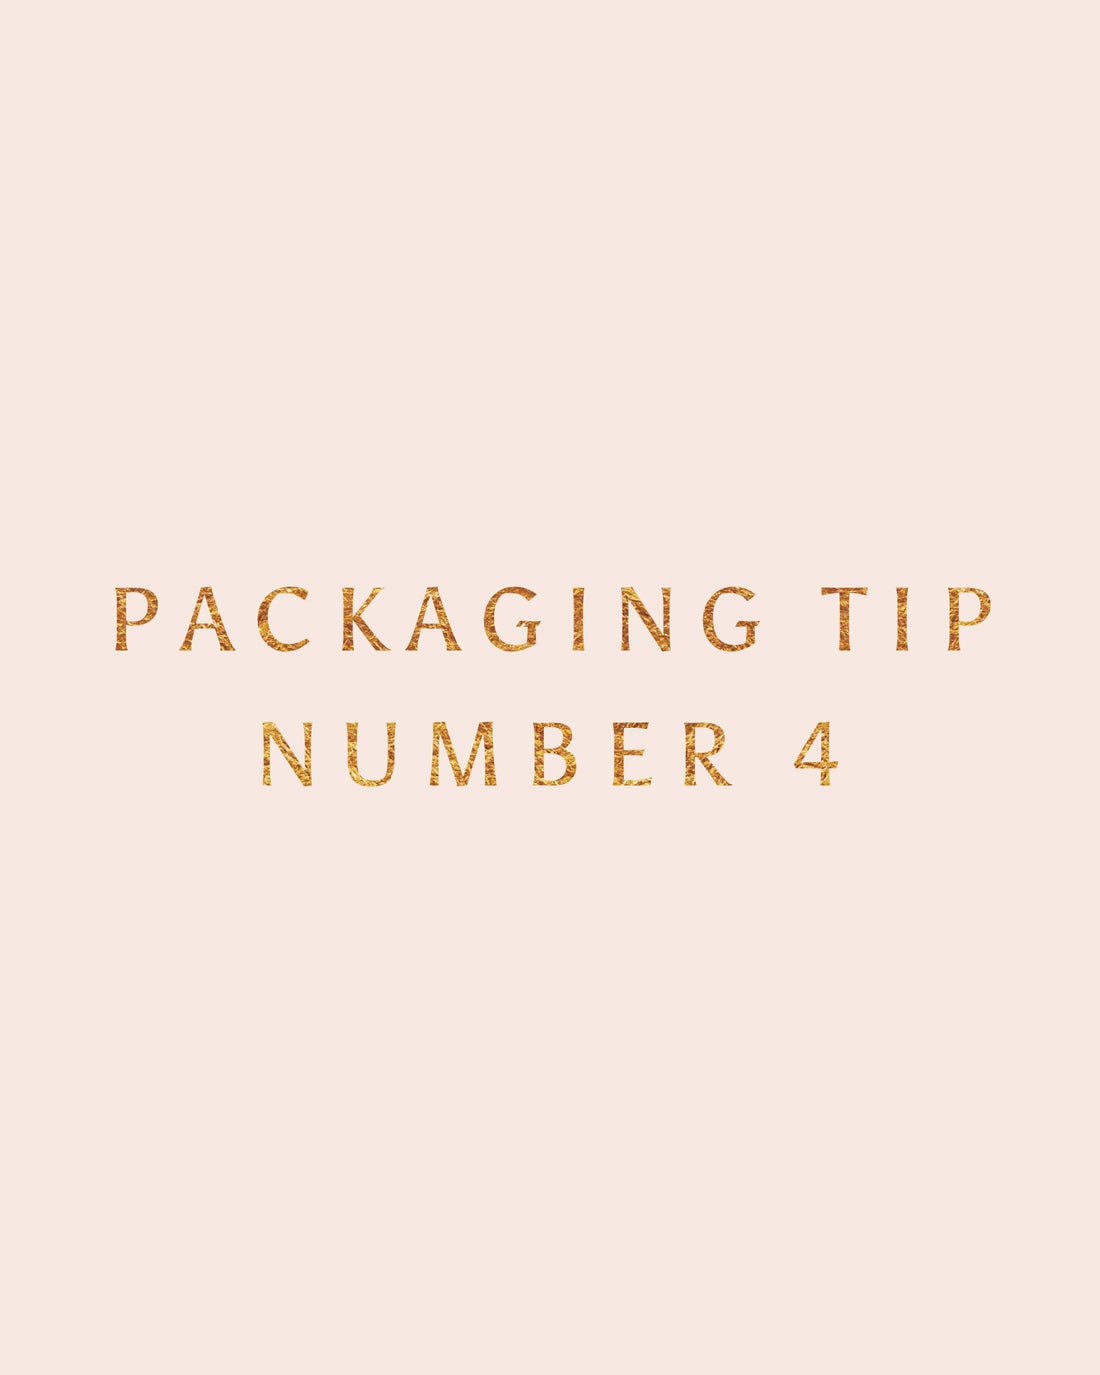 Packaging Tip Number 4 // Do a Recycling Bin Audit